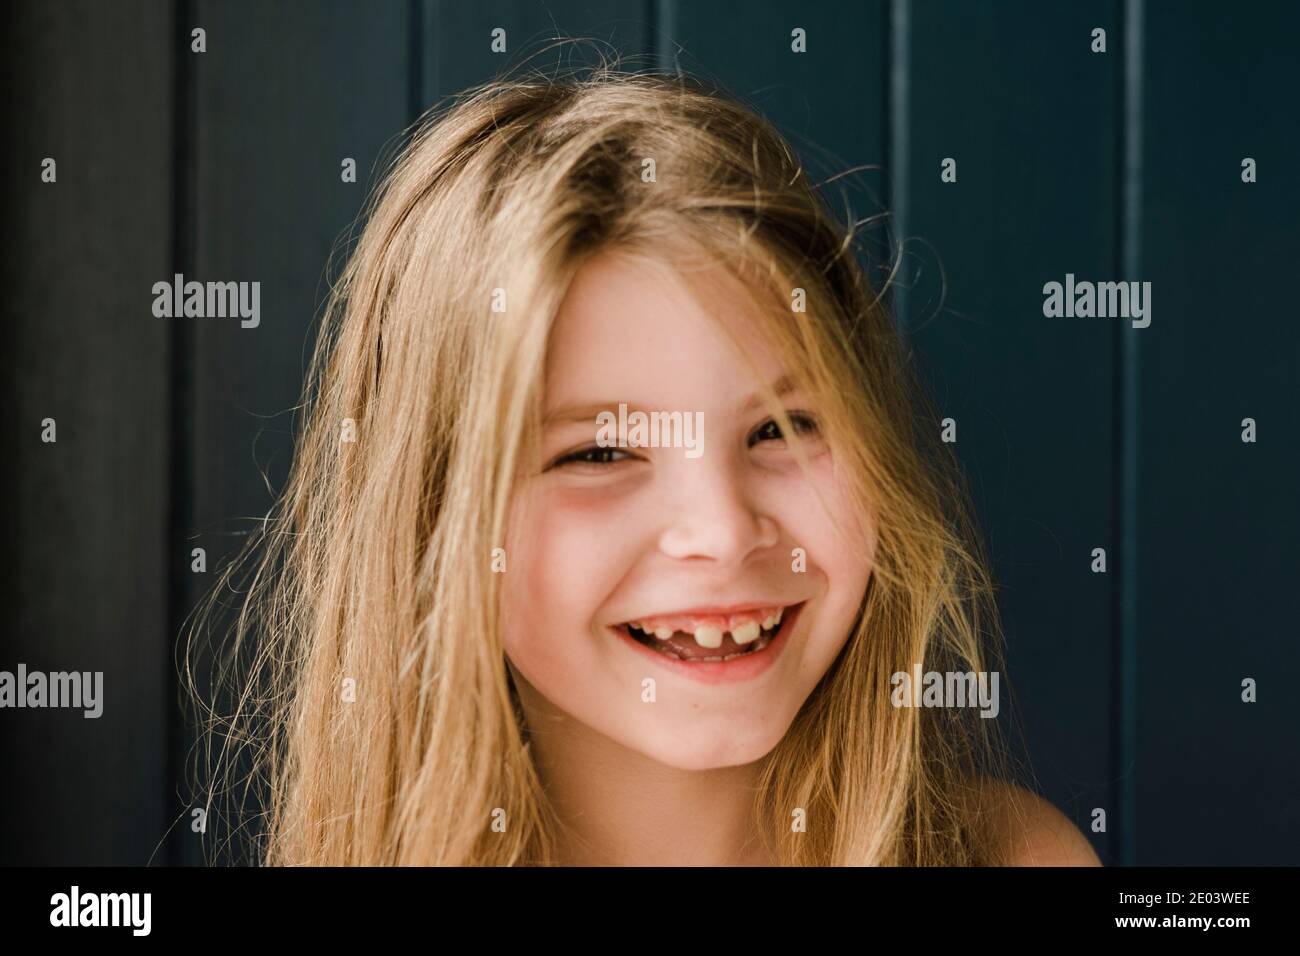 Closeup of a smiling young girl with missing teeth Stock Photo